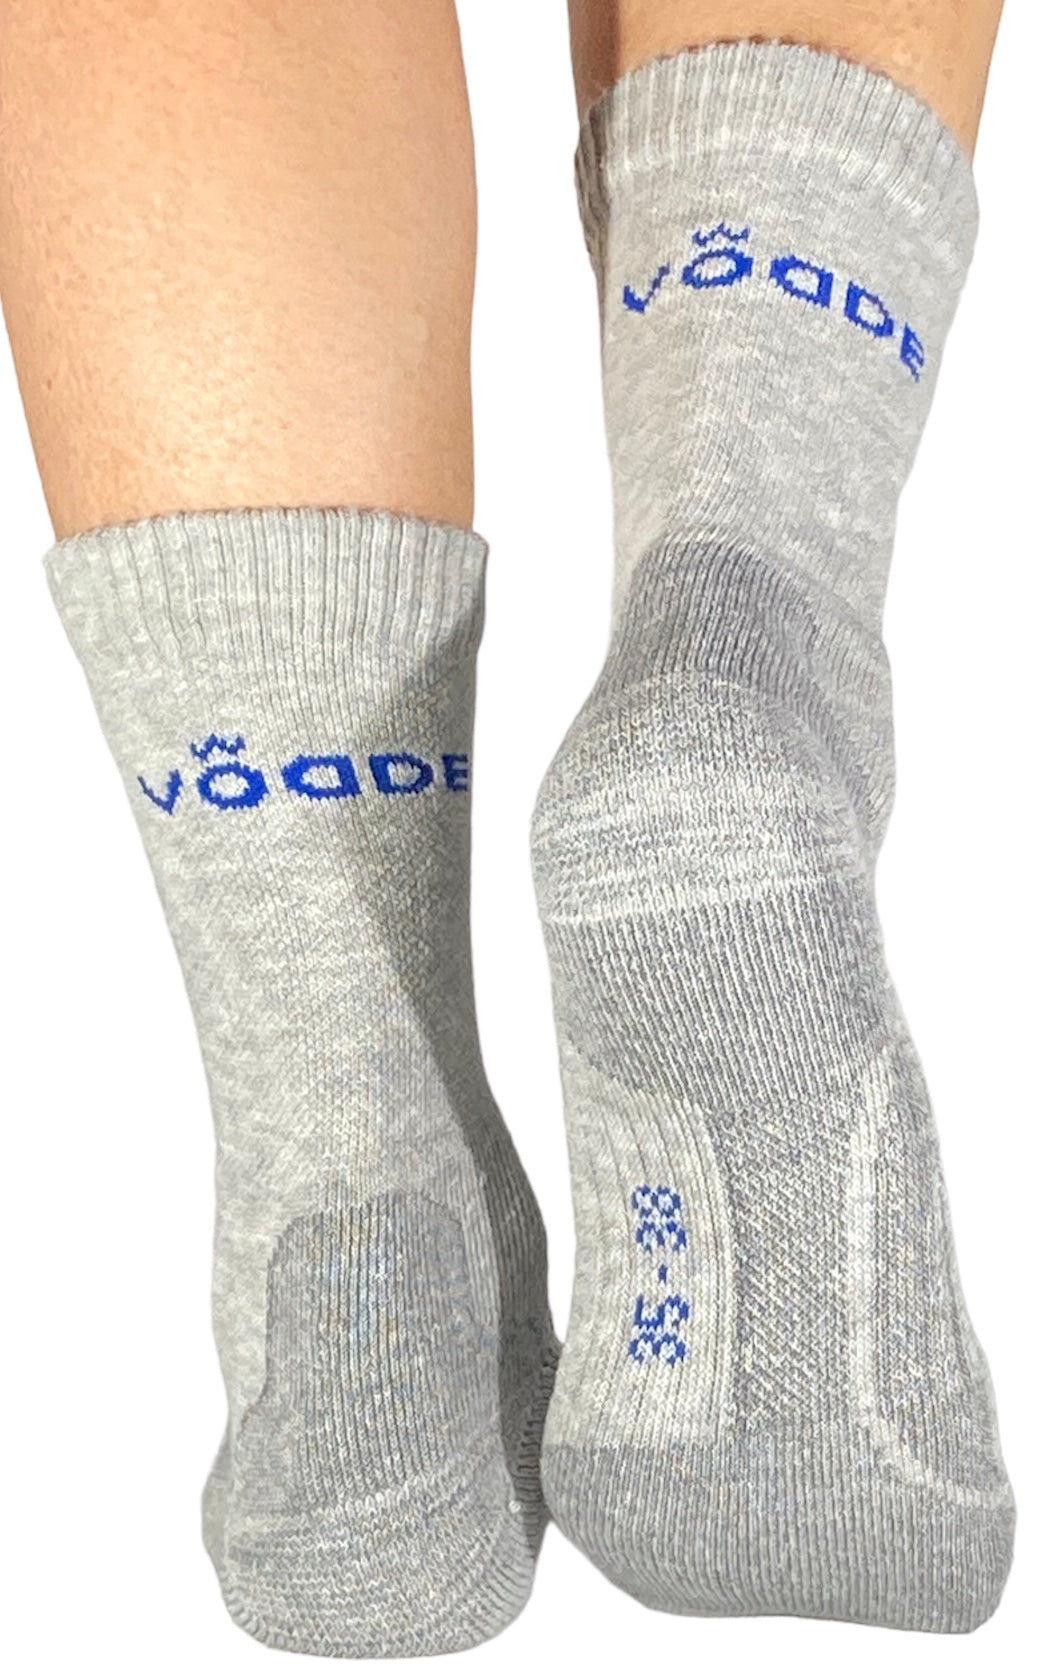 Vodde All Sports 2-pack